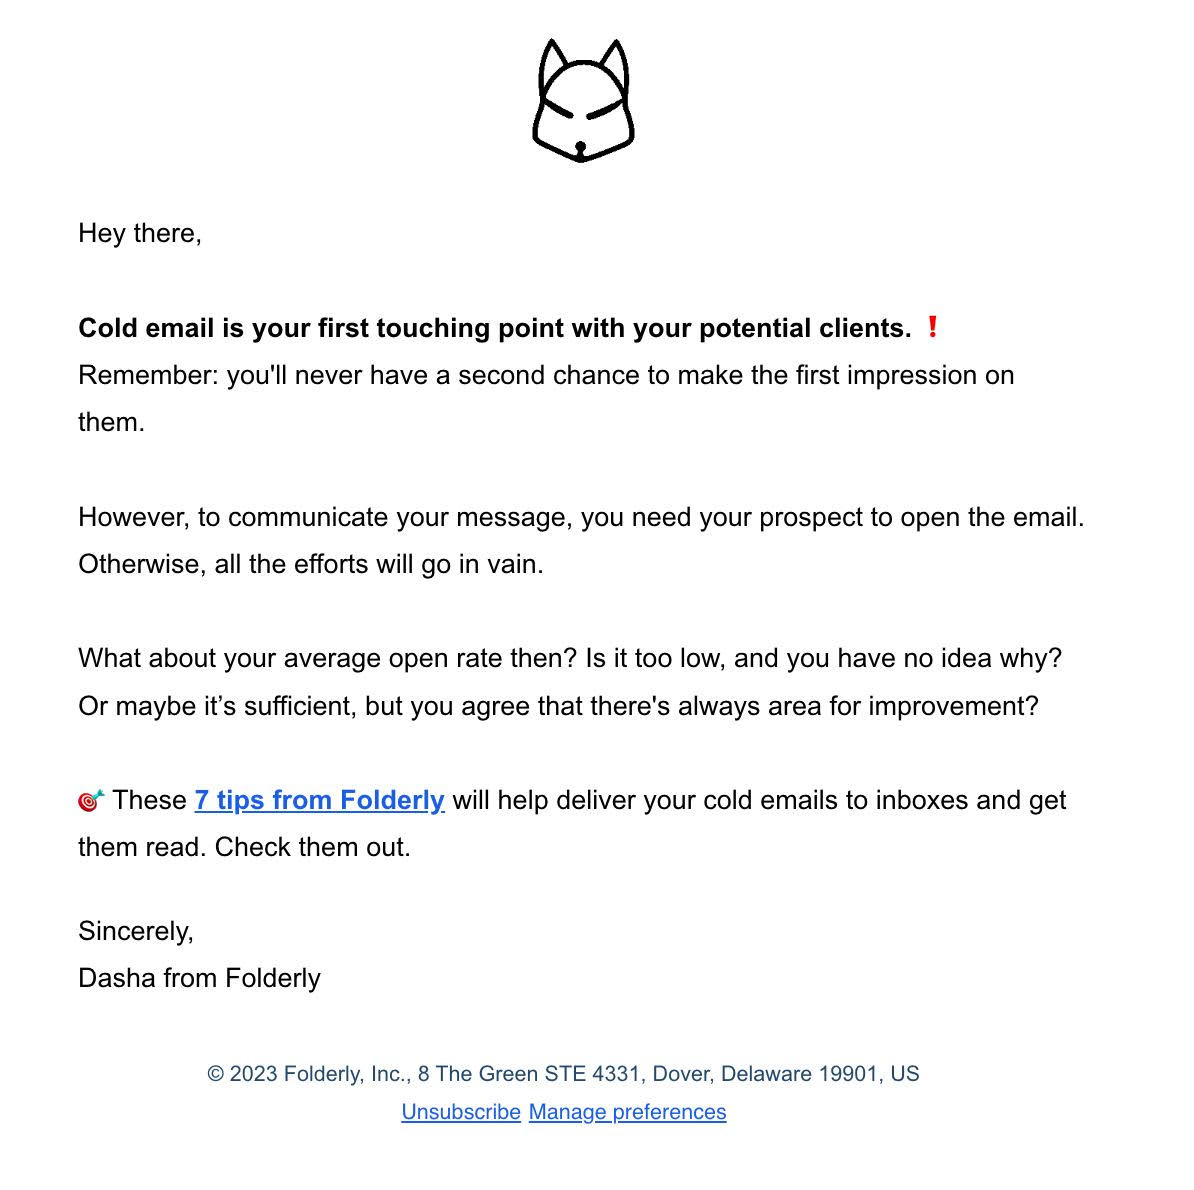 SaaS Plain Text Emails: Screenshot of Folderly's plain text email